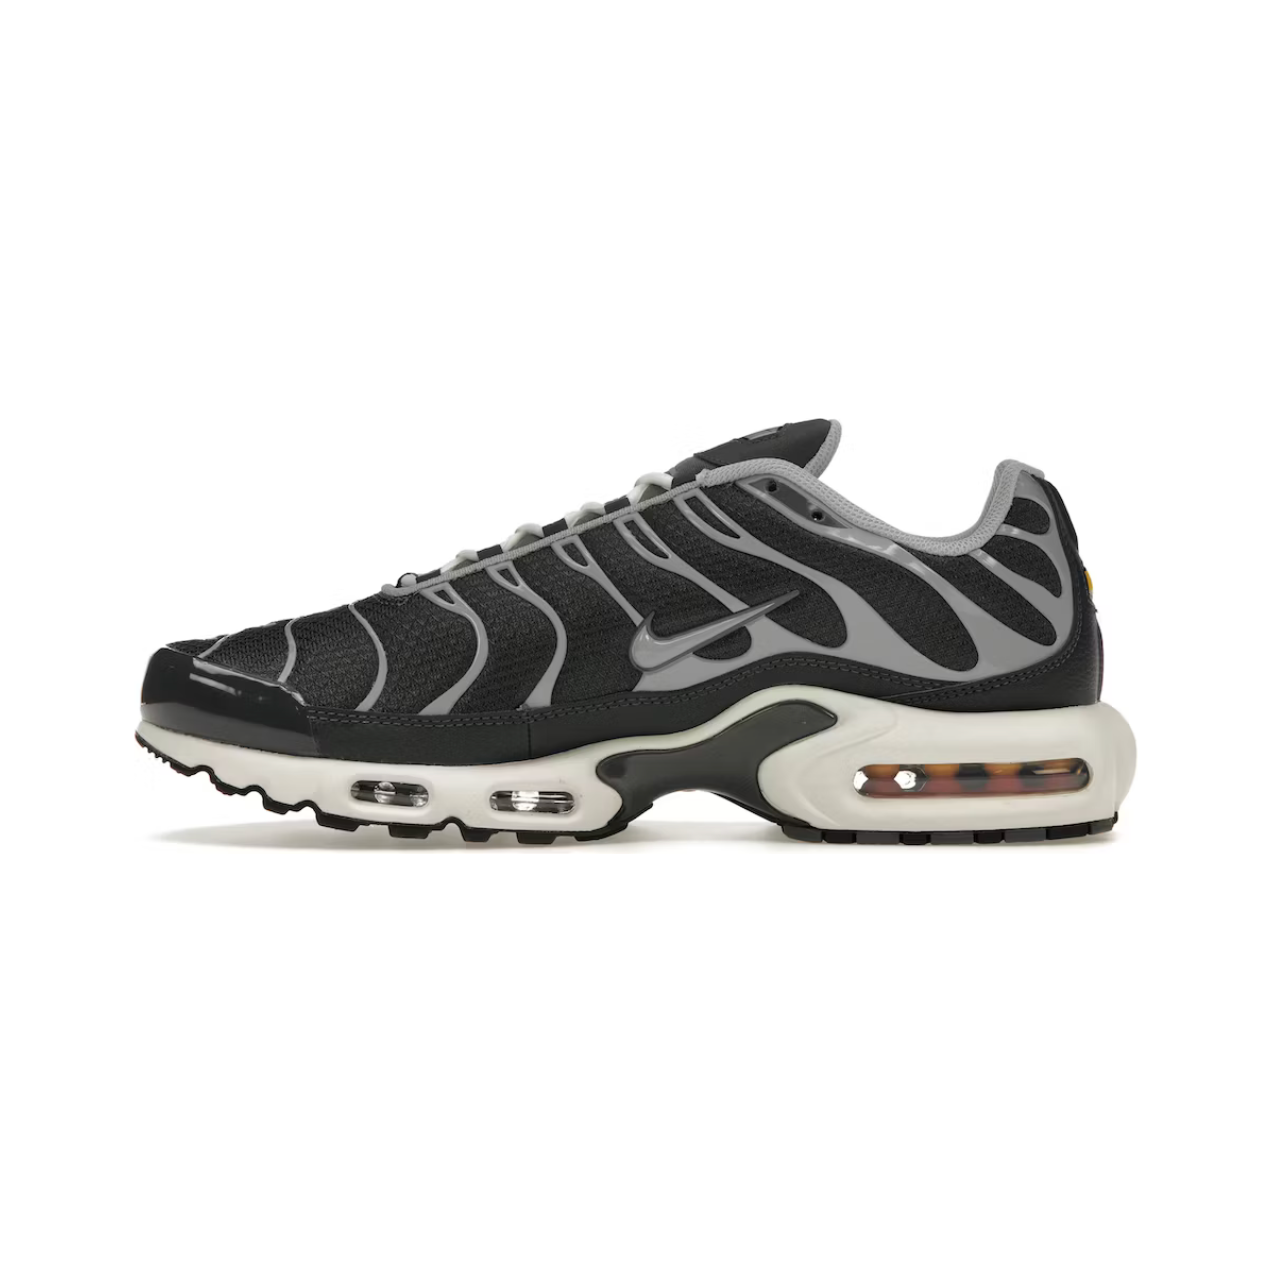 Nike Air Max Plus Greyscale Cool Grey by Nike from £225.00